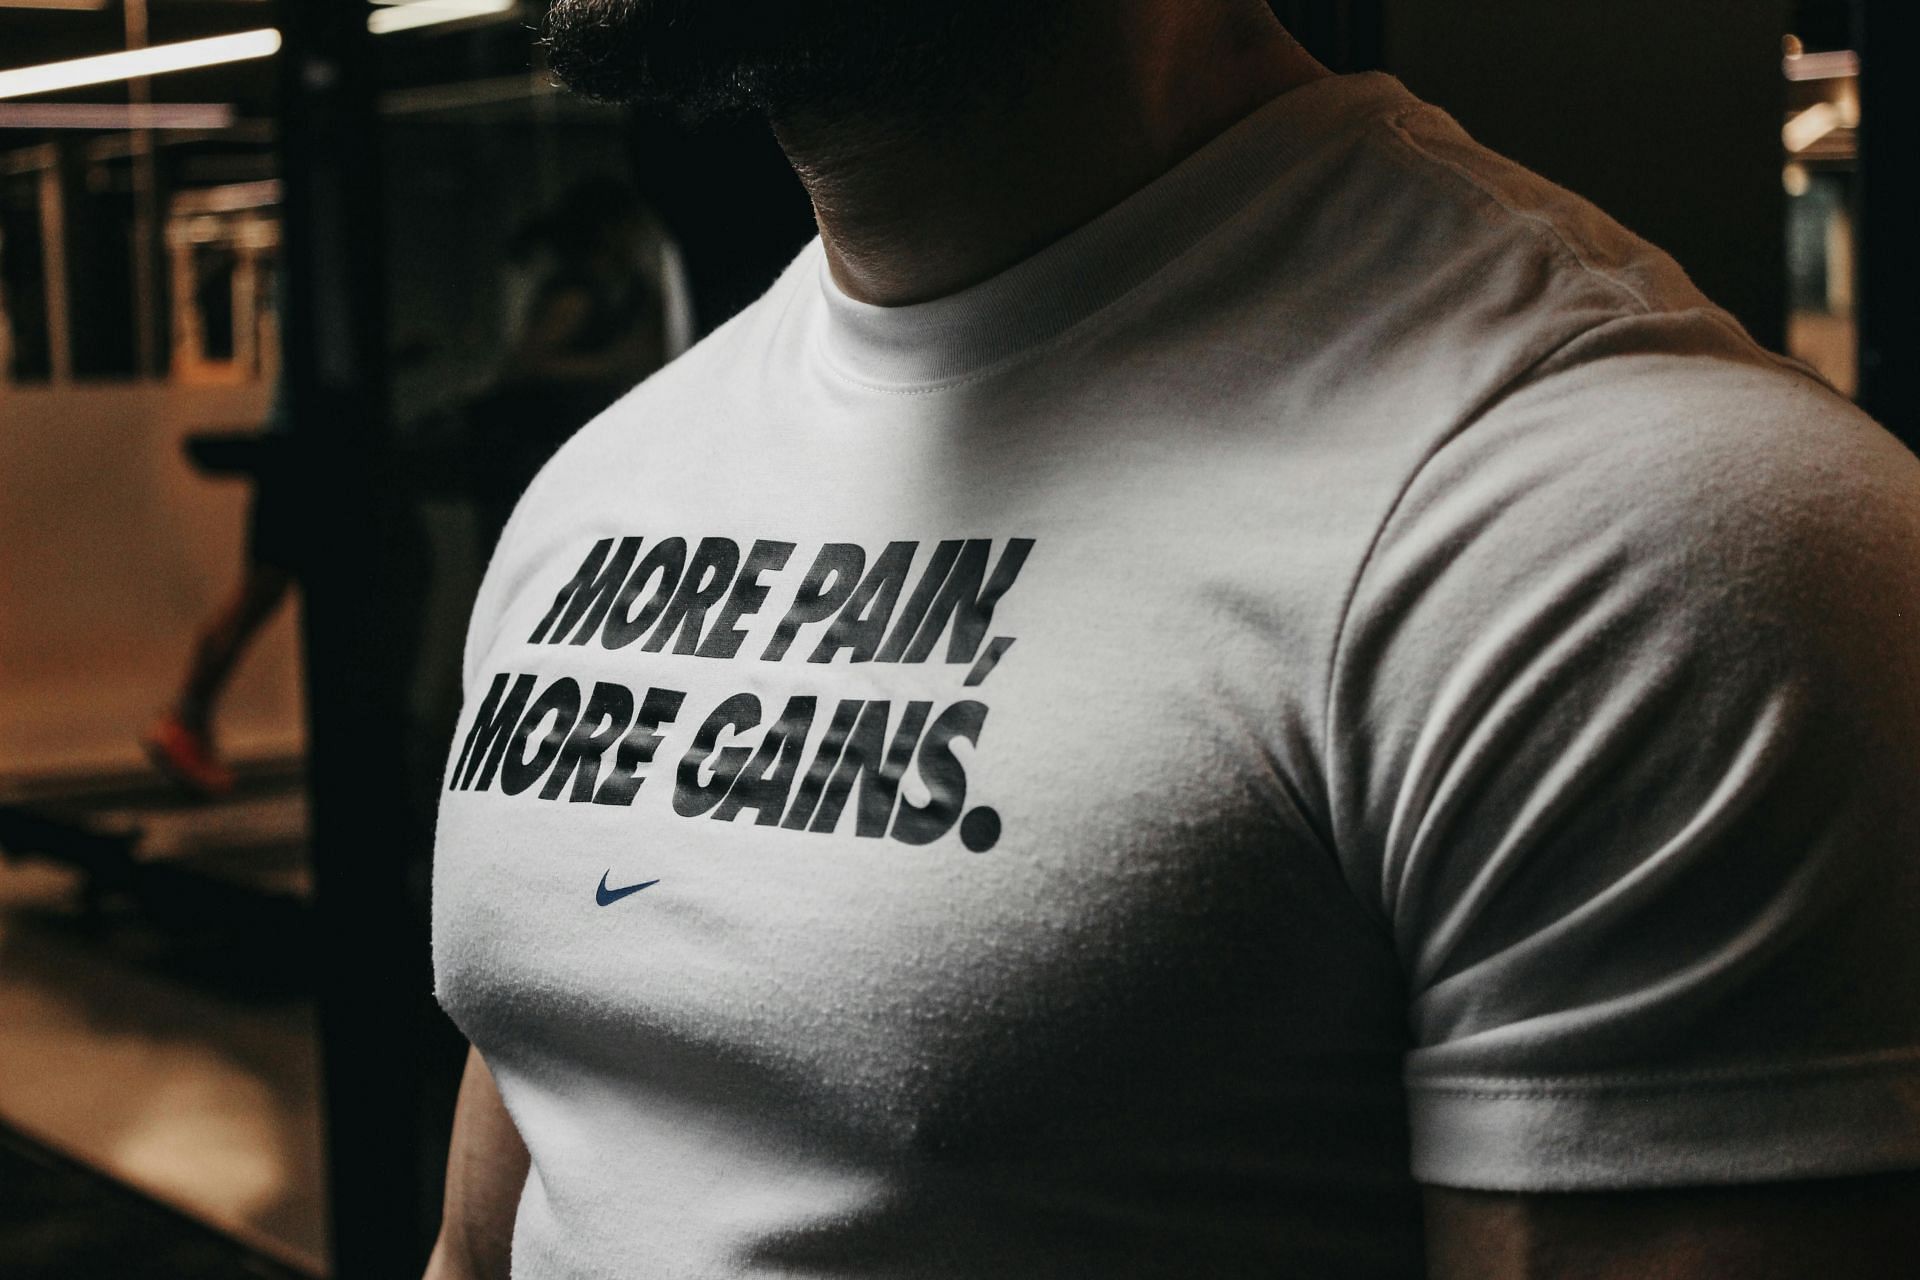 Do gains really have to be connected with pain? (Image via Pexels/ Dogu Tuncer)